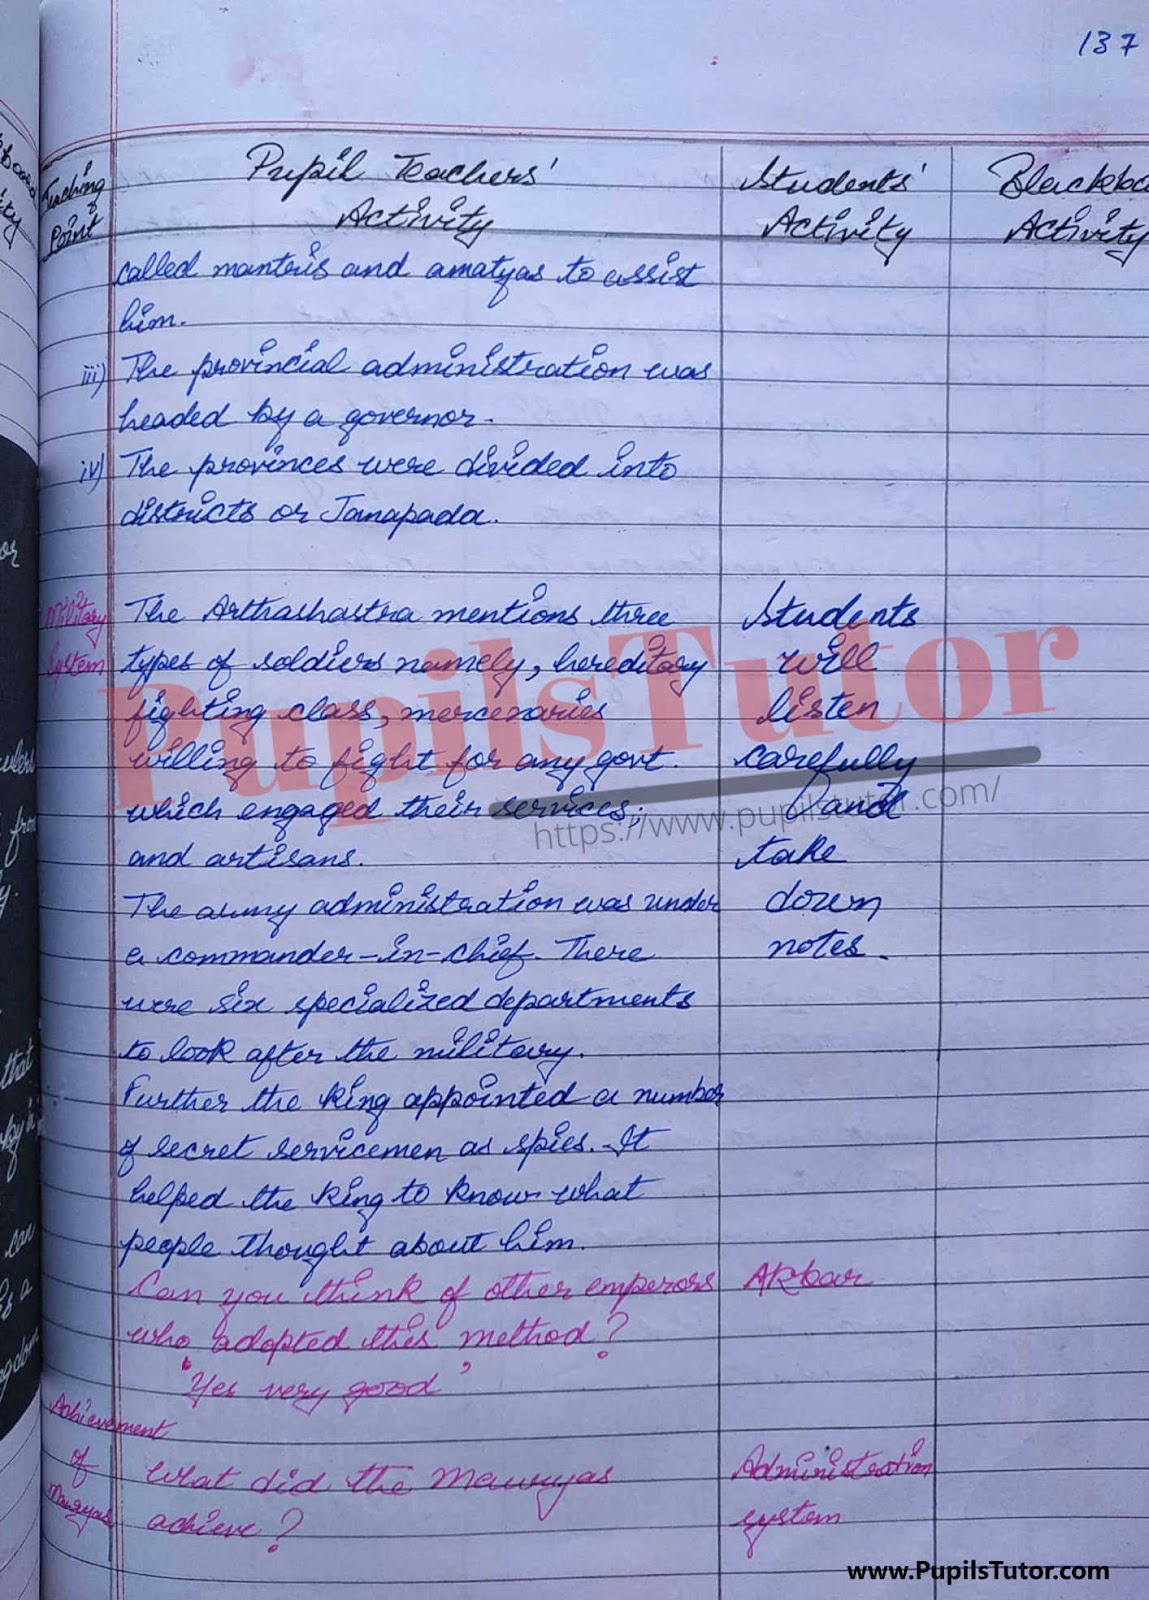 Lesson Plan On Samrat Ashoka For Class 6th.  – [Page And Pic Number 5] – https://www.pupilstutor.com/